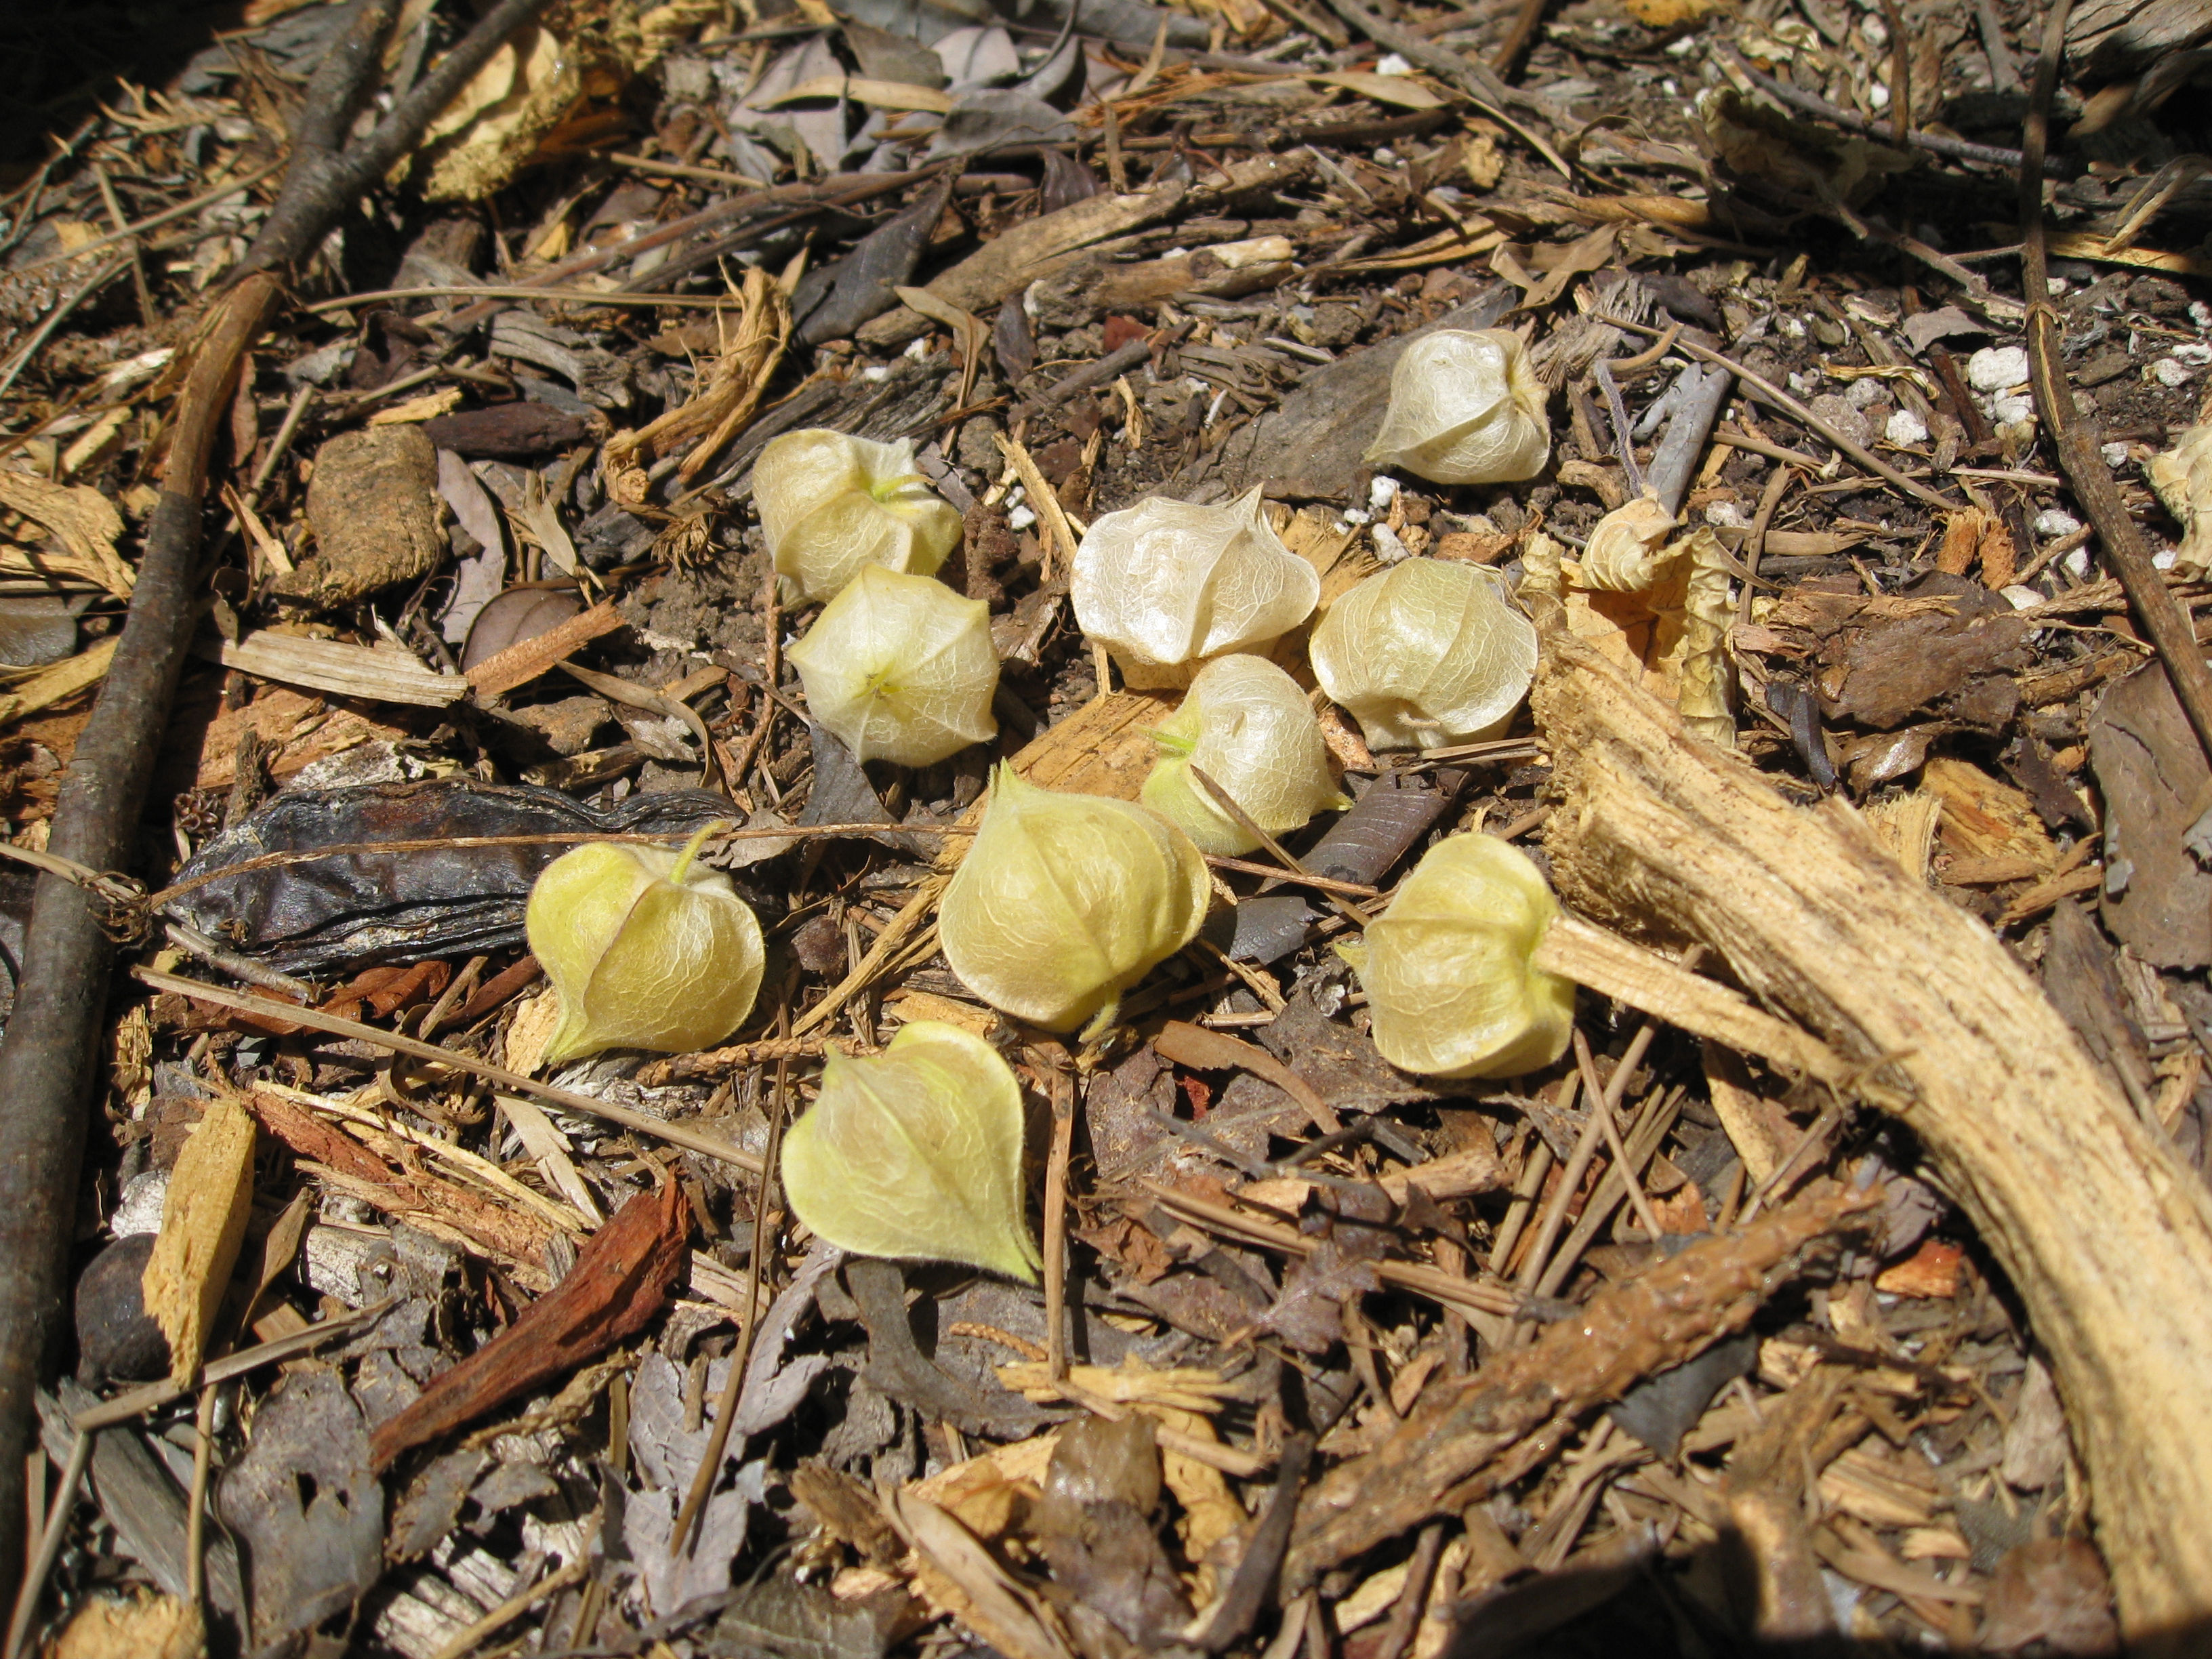 Ground cherries drop to the ground when ready to pick. Easy peasy.